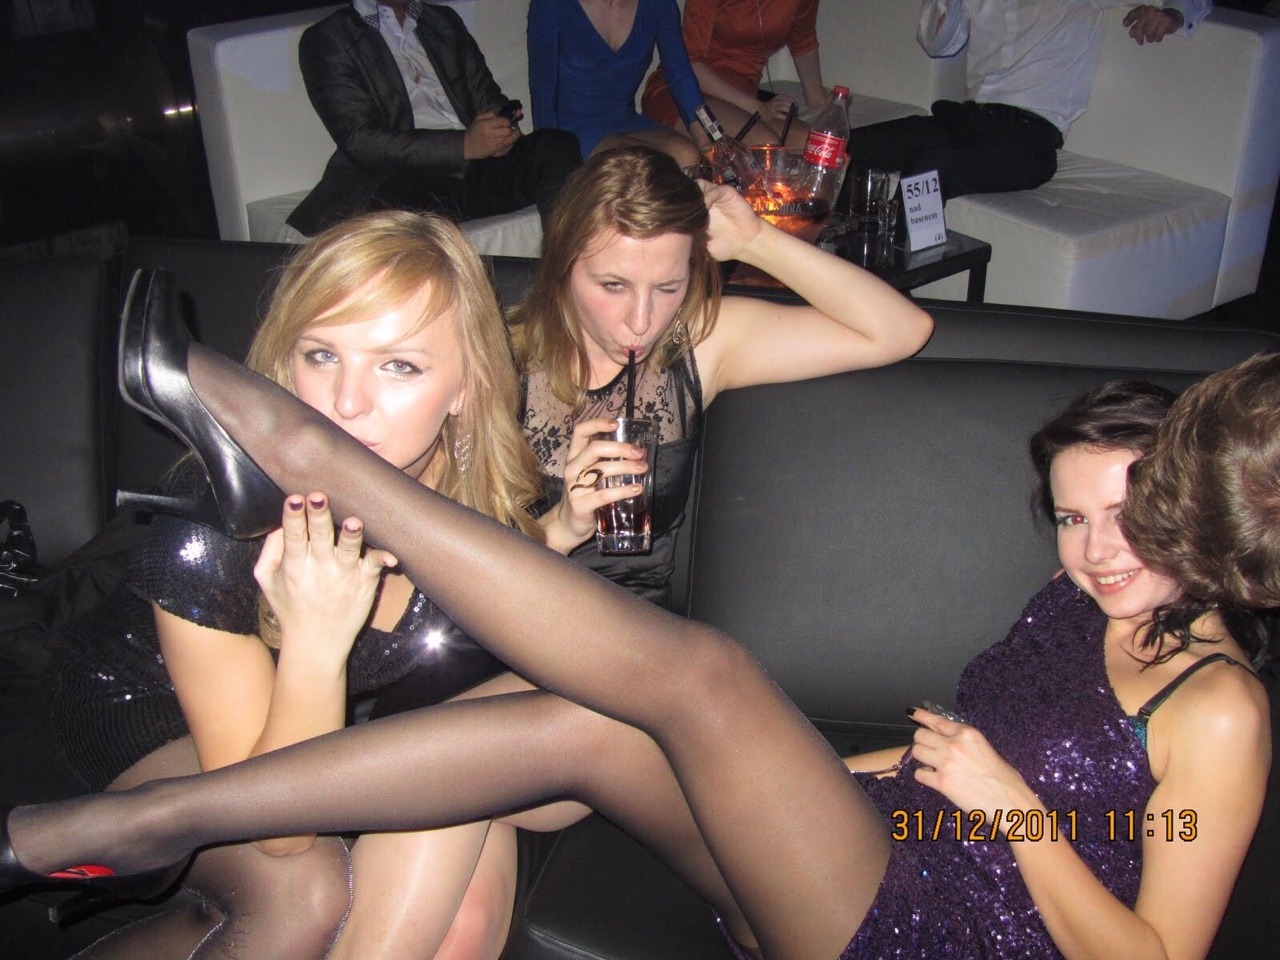 Teen pantyhose party - Porn pictures